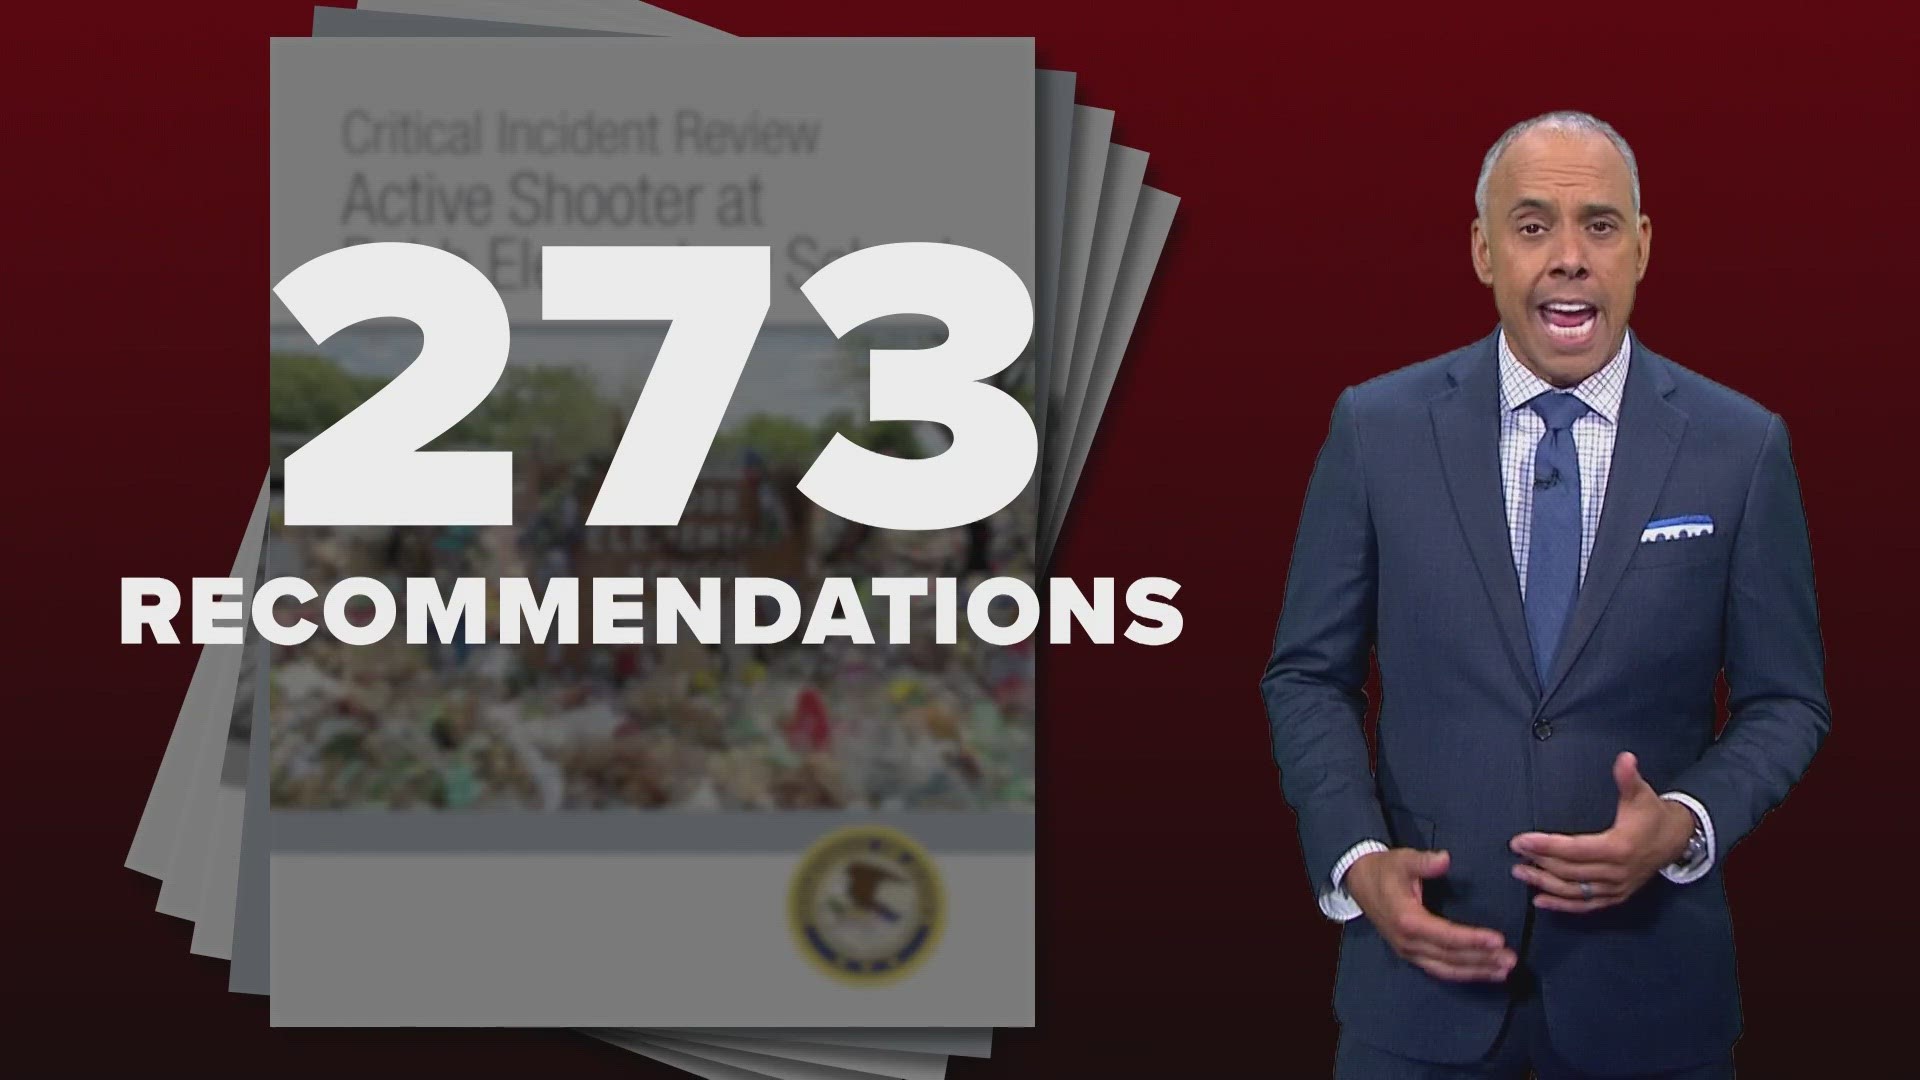 The report listed 273 recommendations for law enforcement, including adopting national standards for confronting an active shooter.